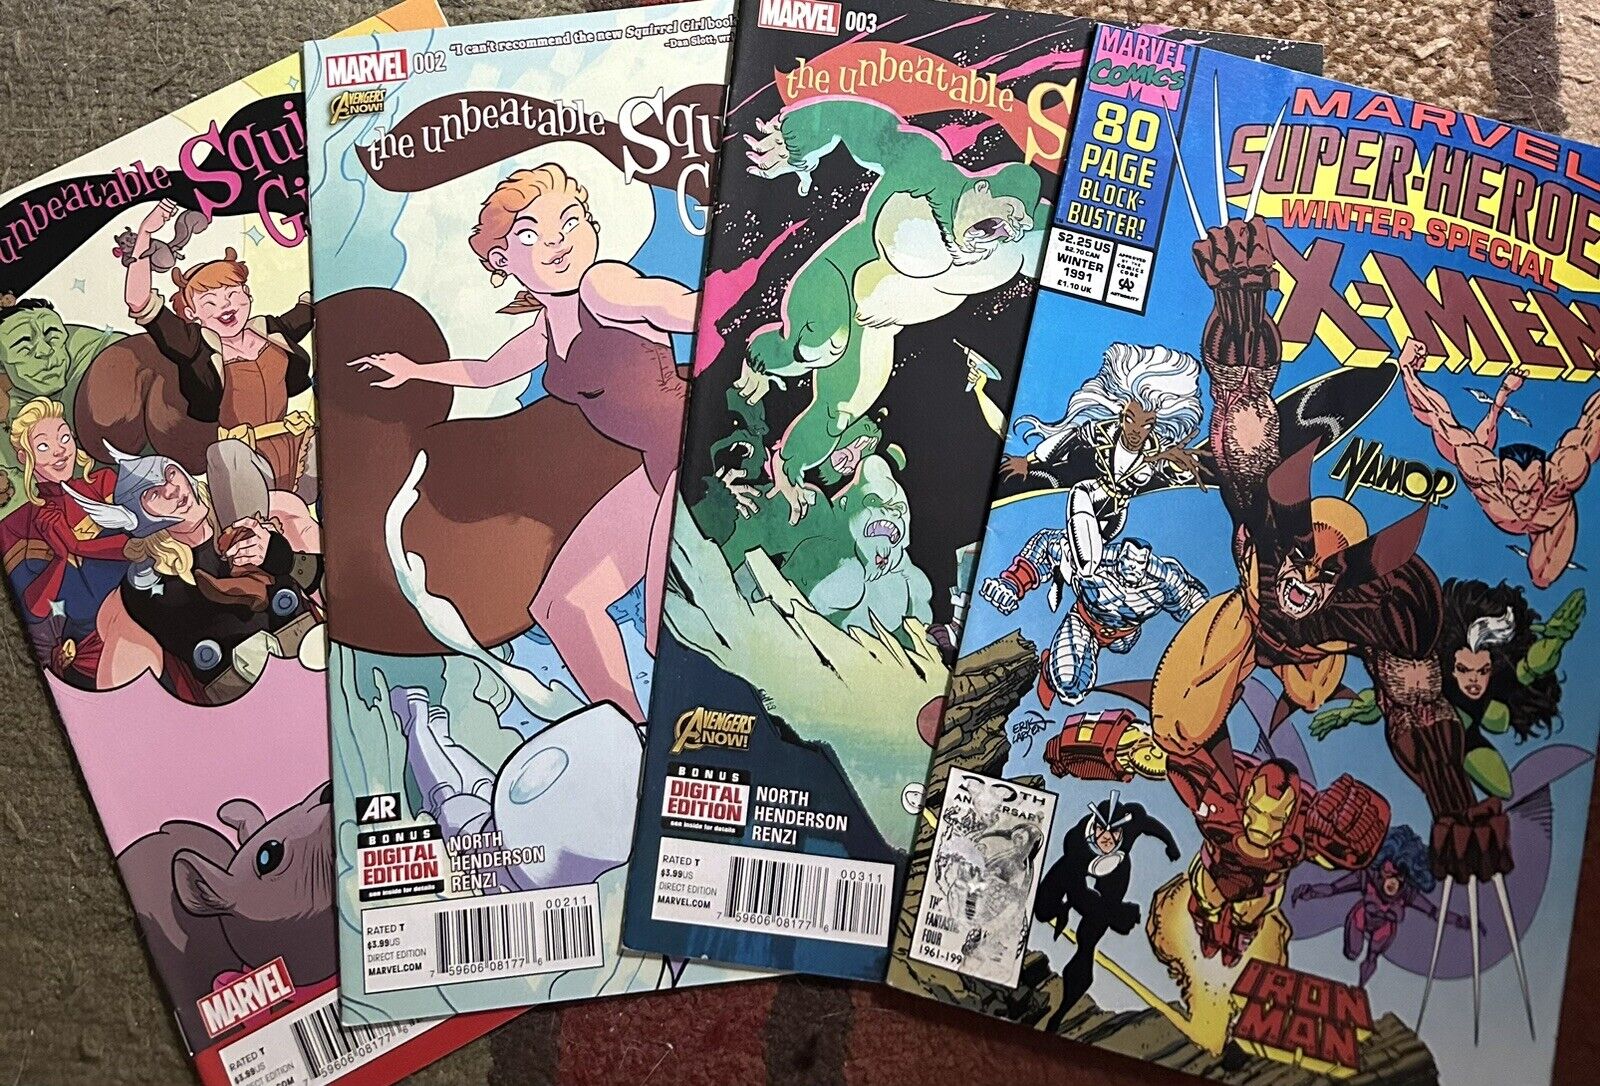 The Unbeatable Squirrel Girl 1 2 3 + 1st Appearance In Marvel Super Heroes 8